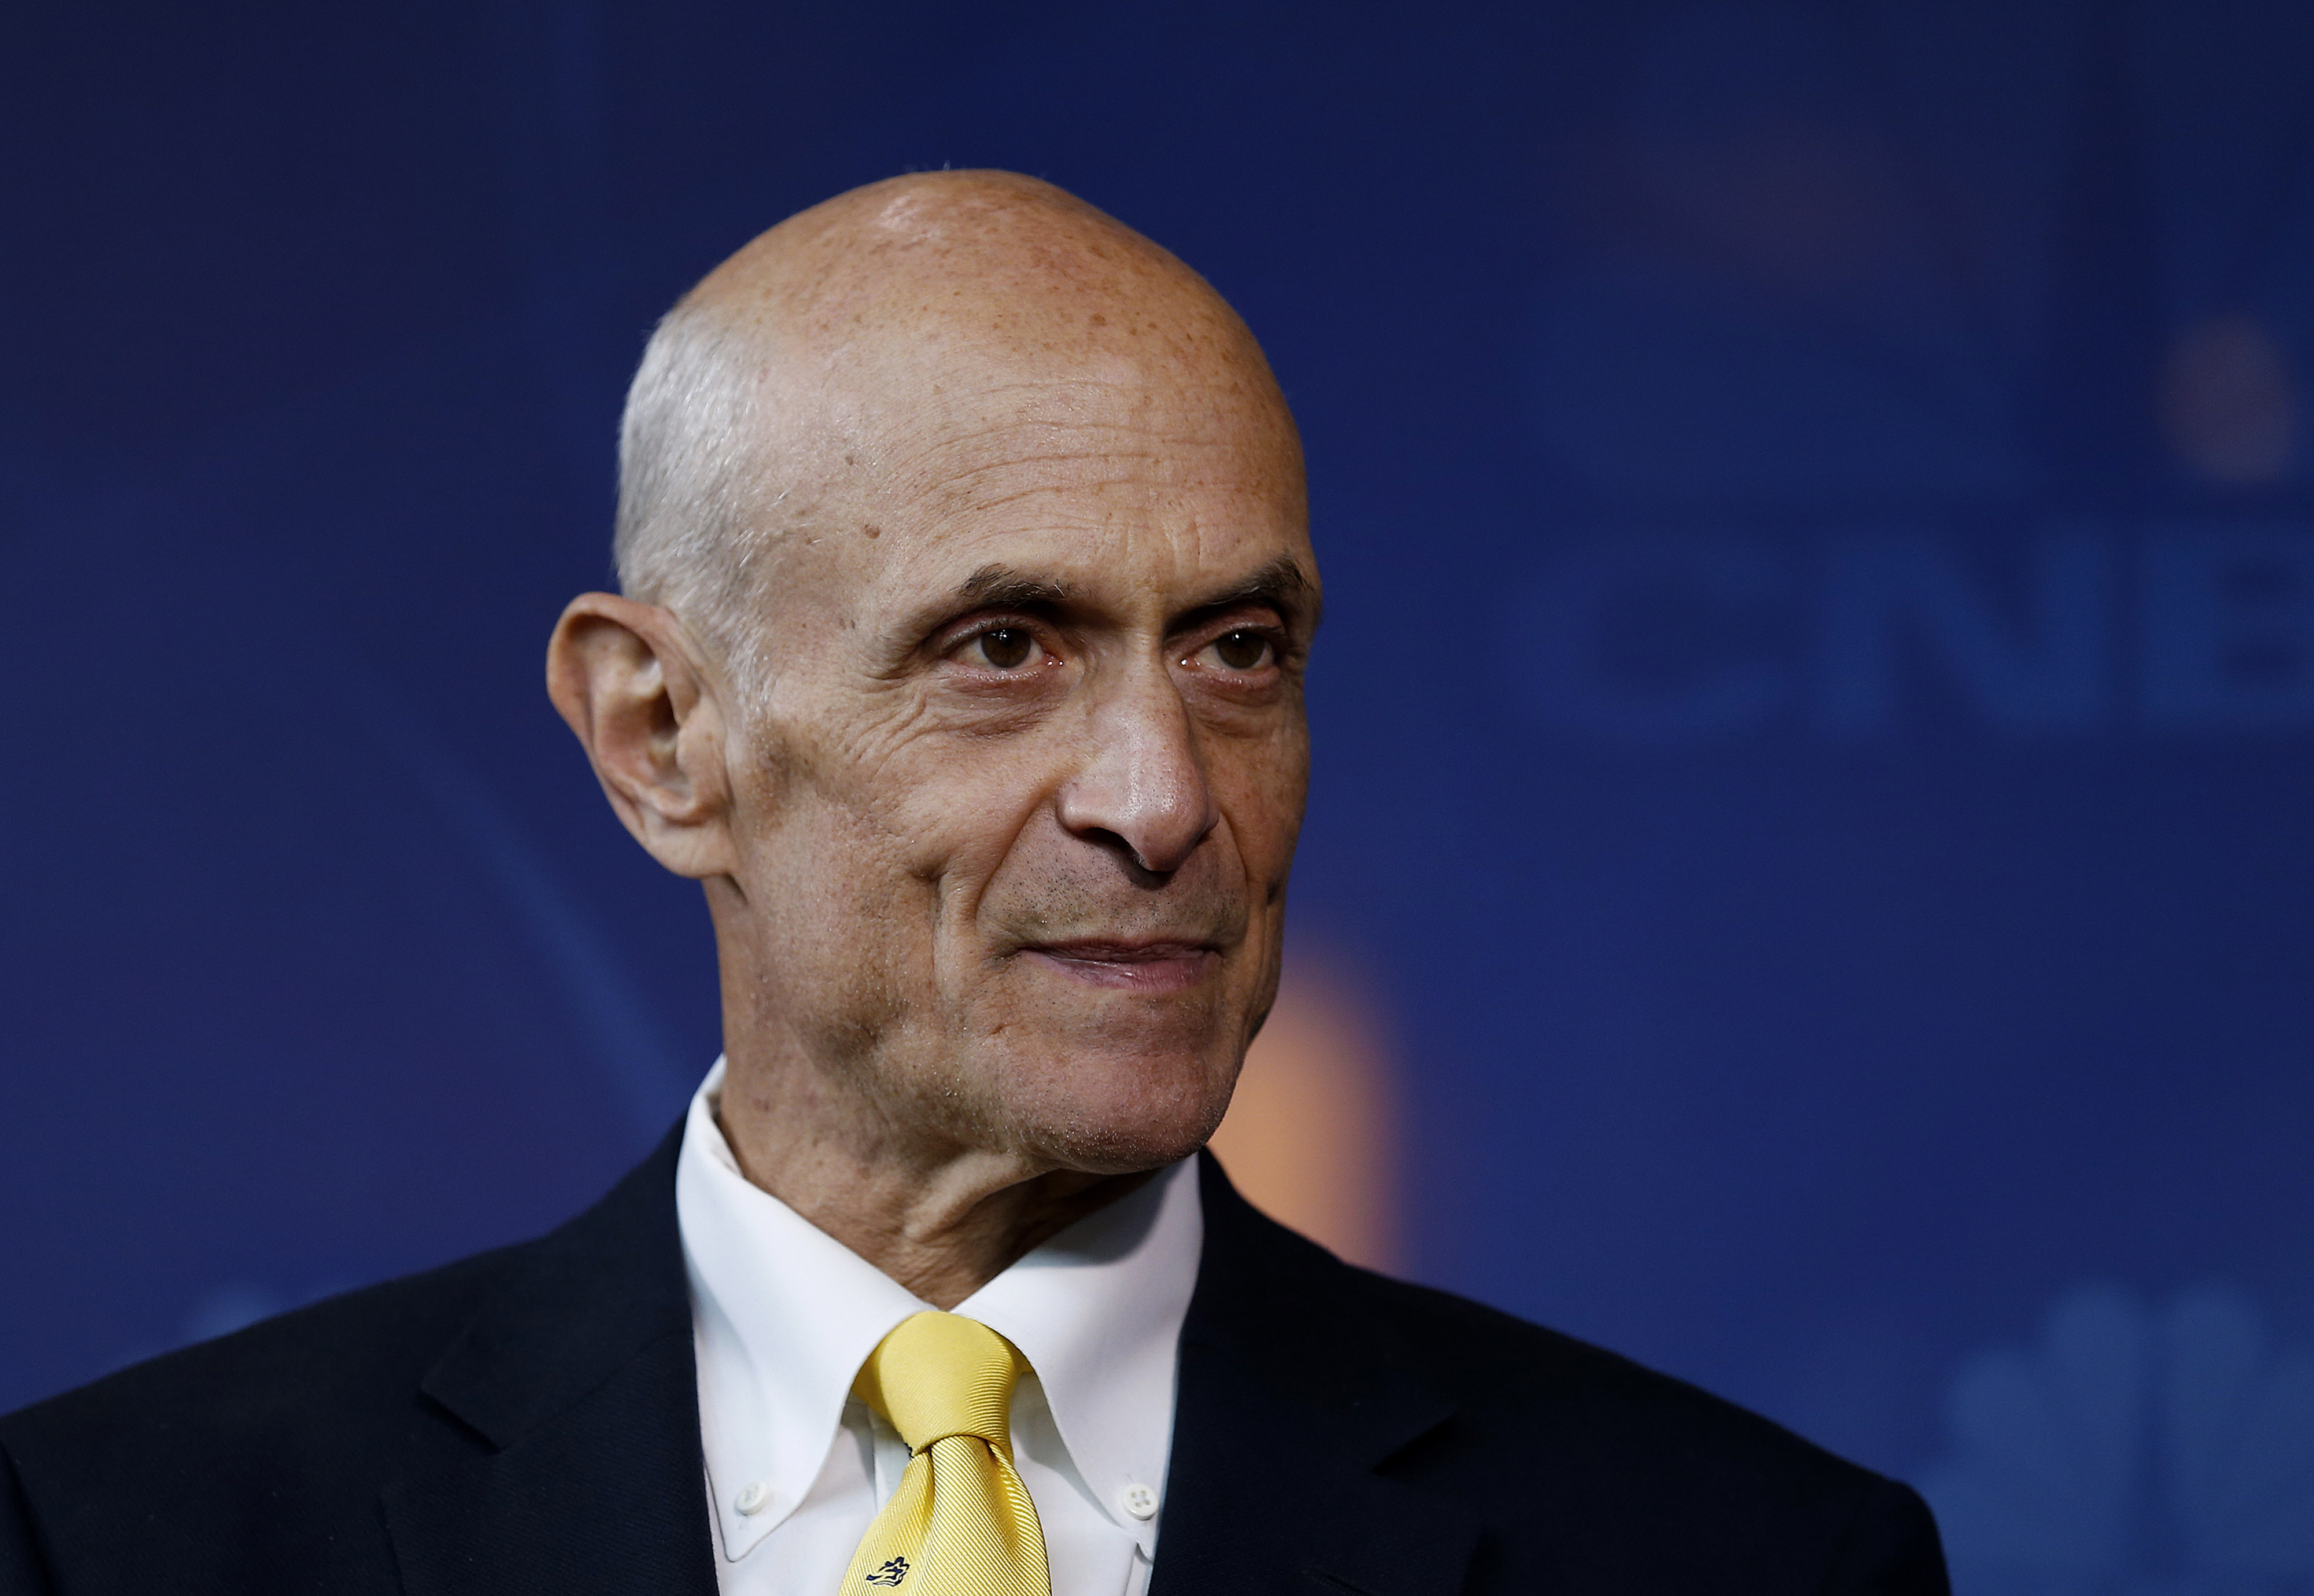 Michael Chertoff speaks during an interview in Houston, Texas on March 5, 2014. (Aaron M. Sprecher—Bloomberg/Getty Images)